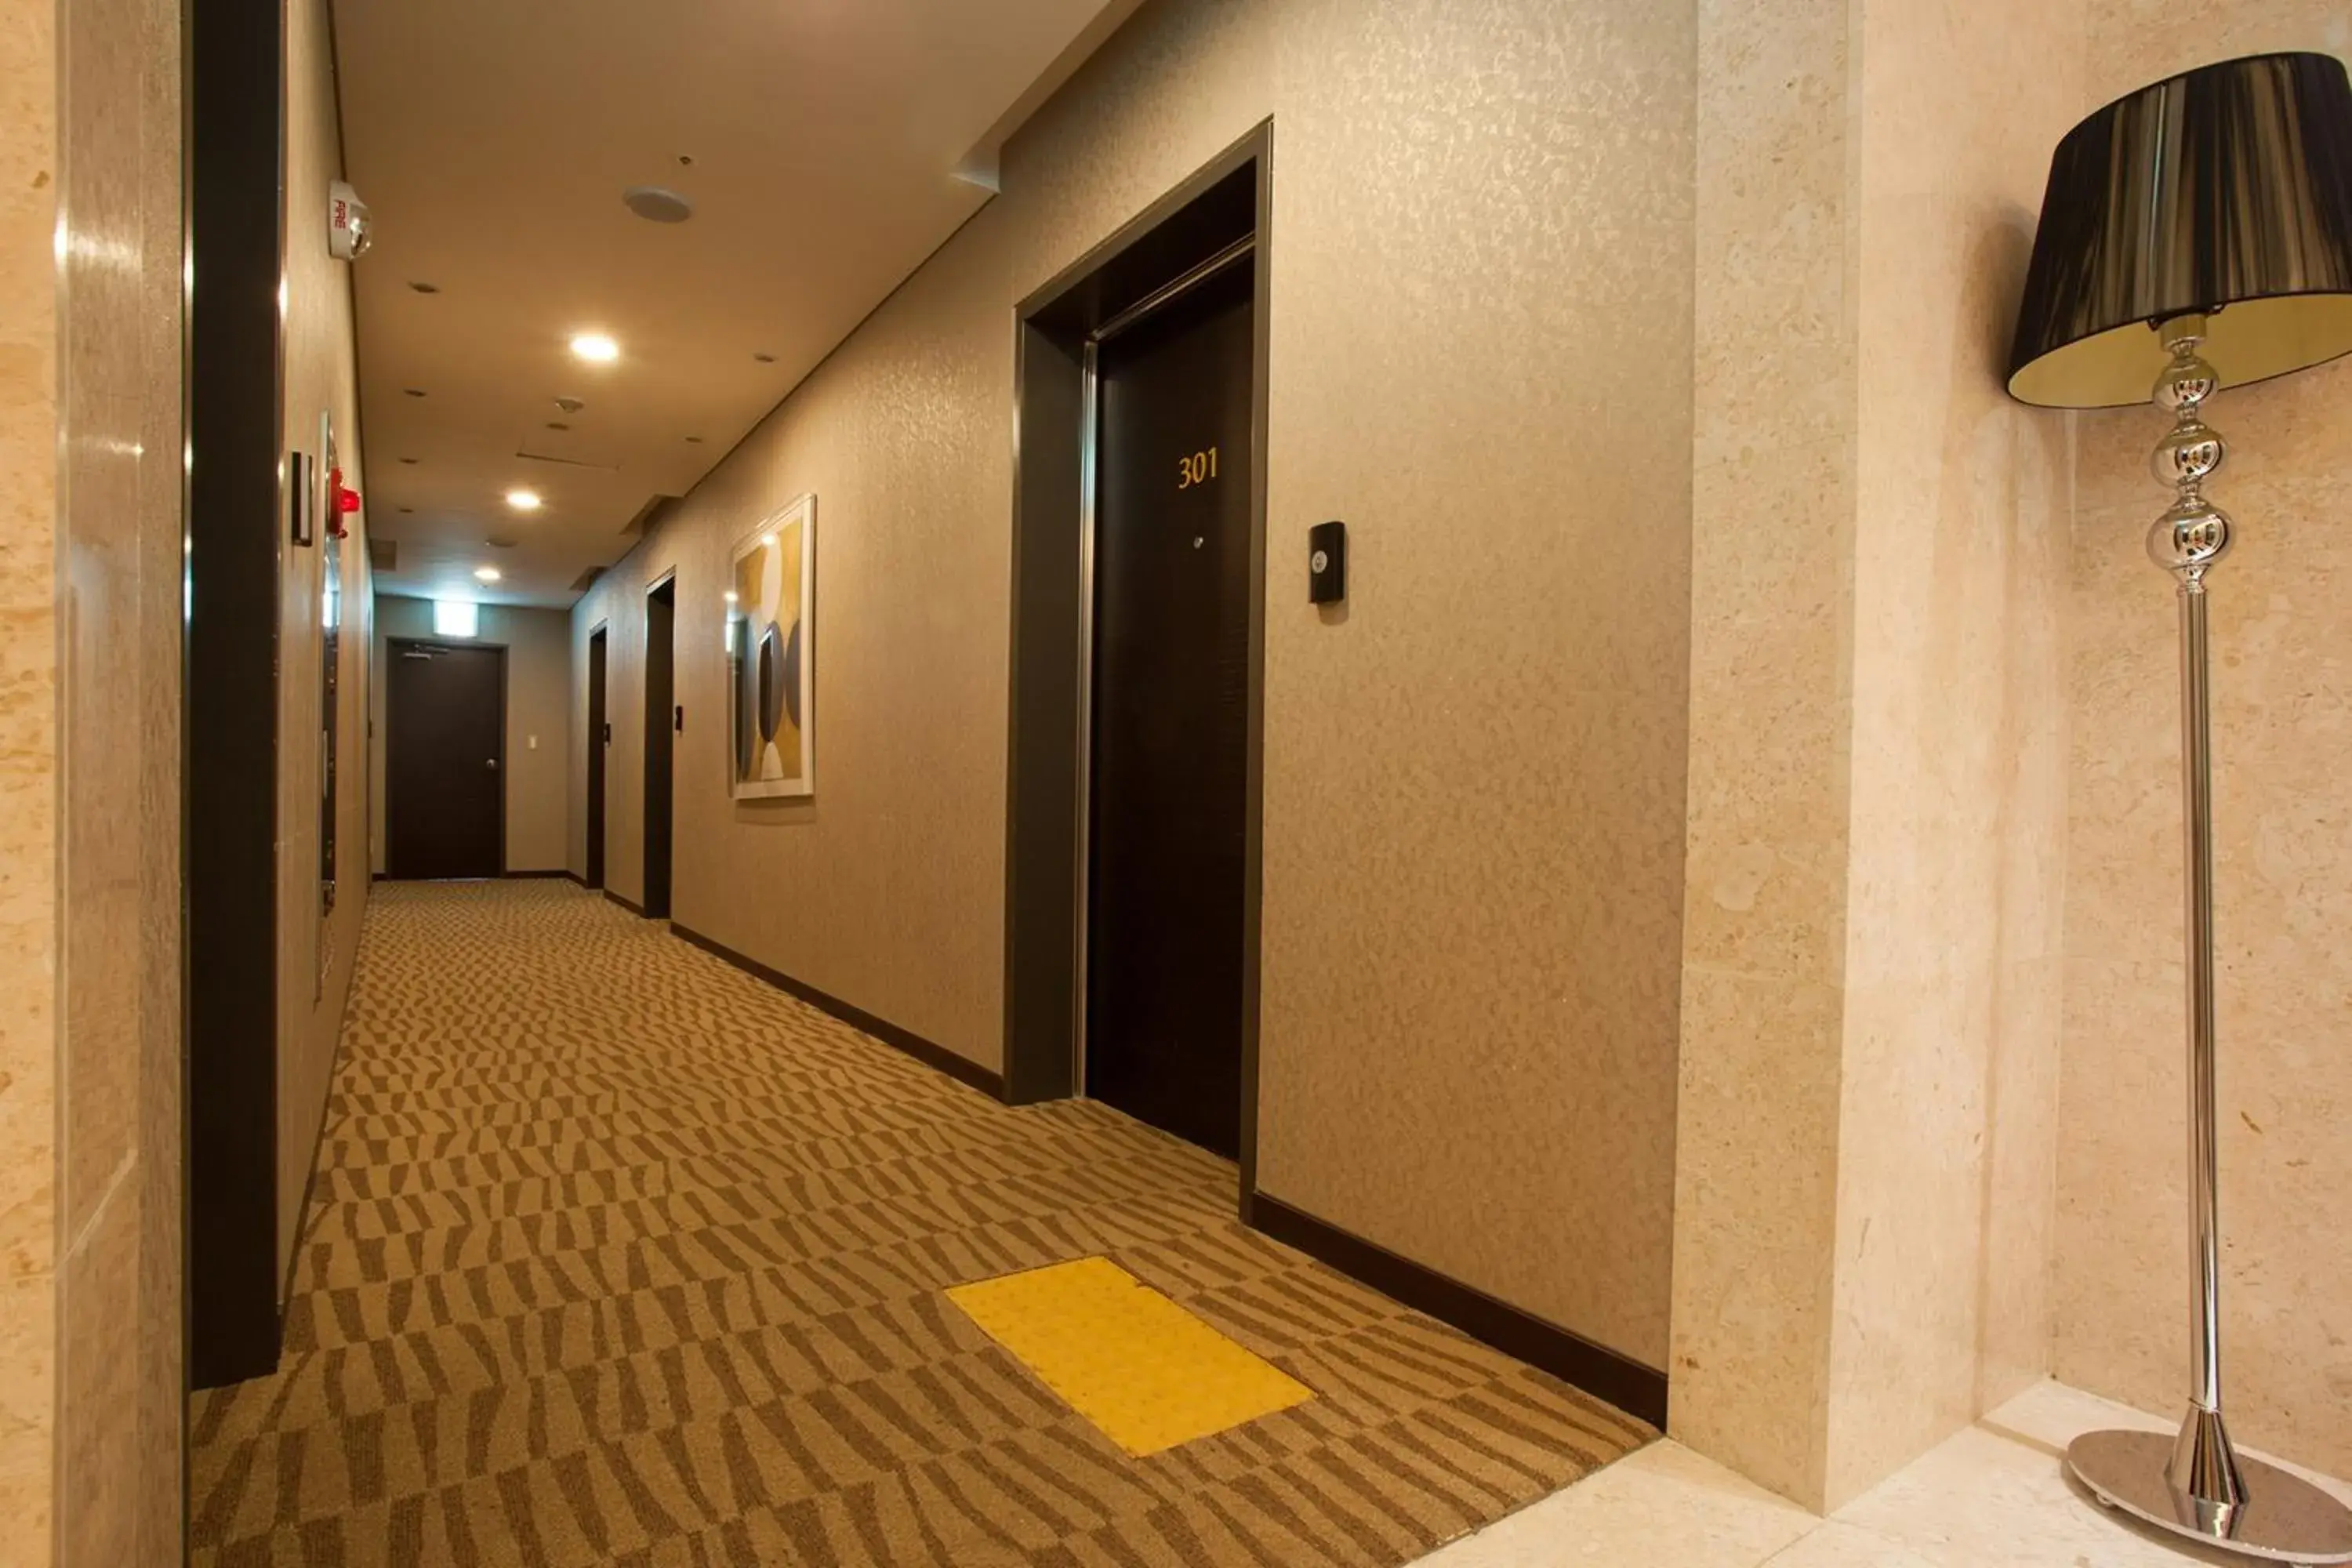 Area and facilities in Hotel Pharos